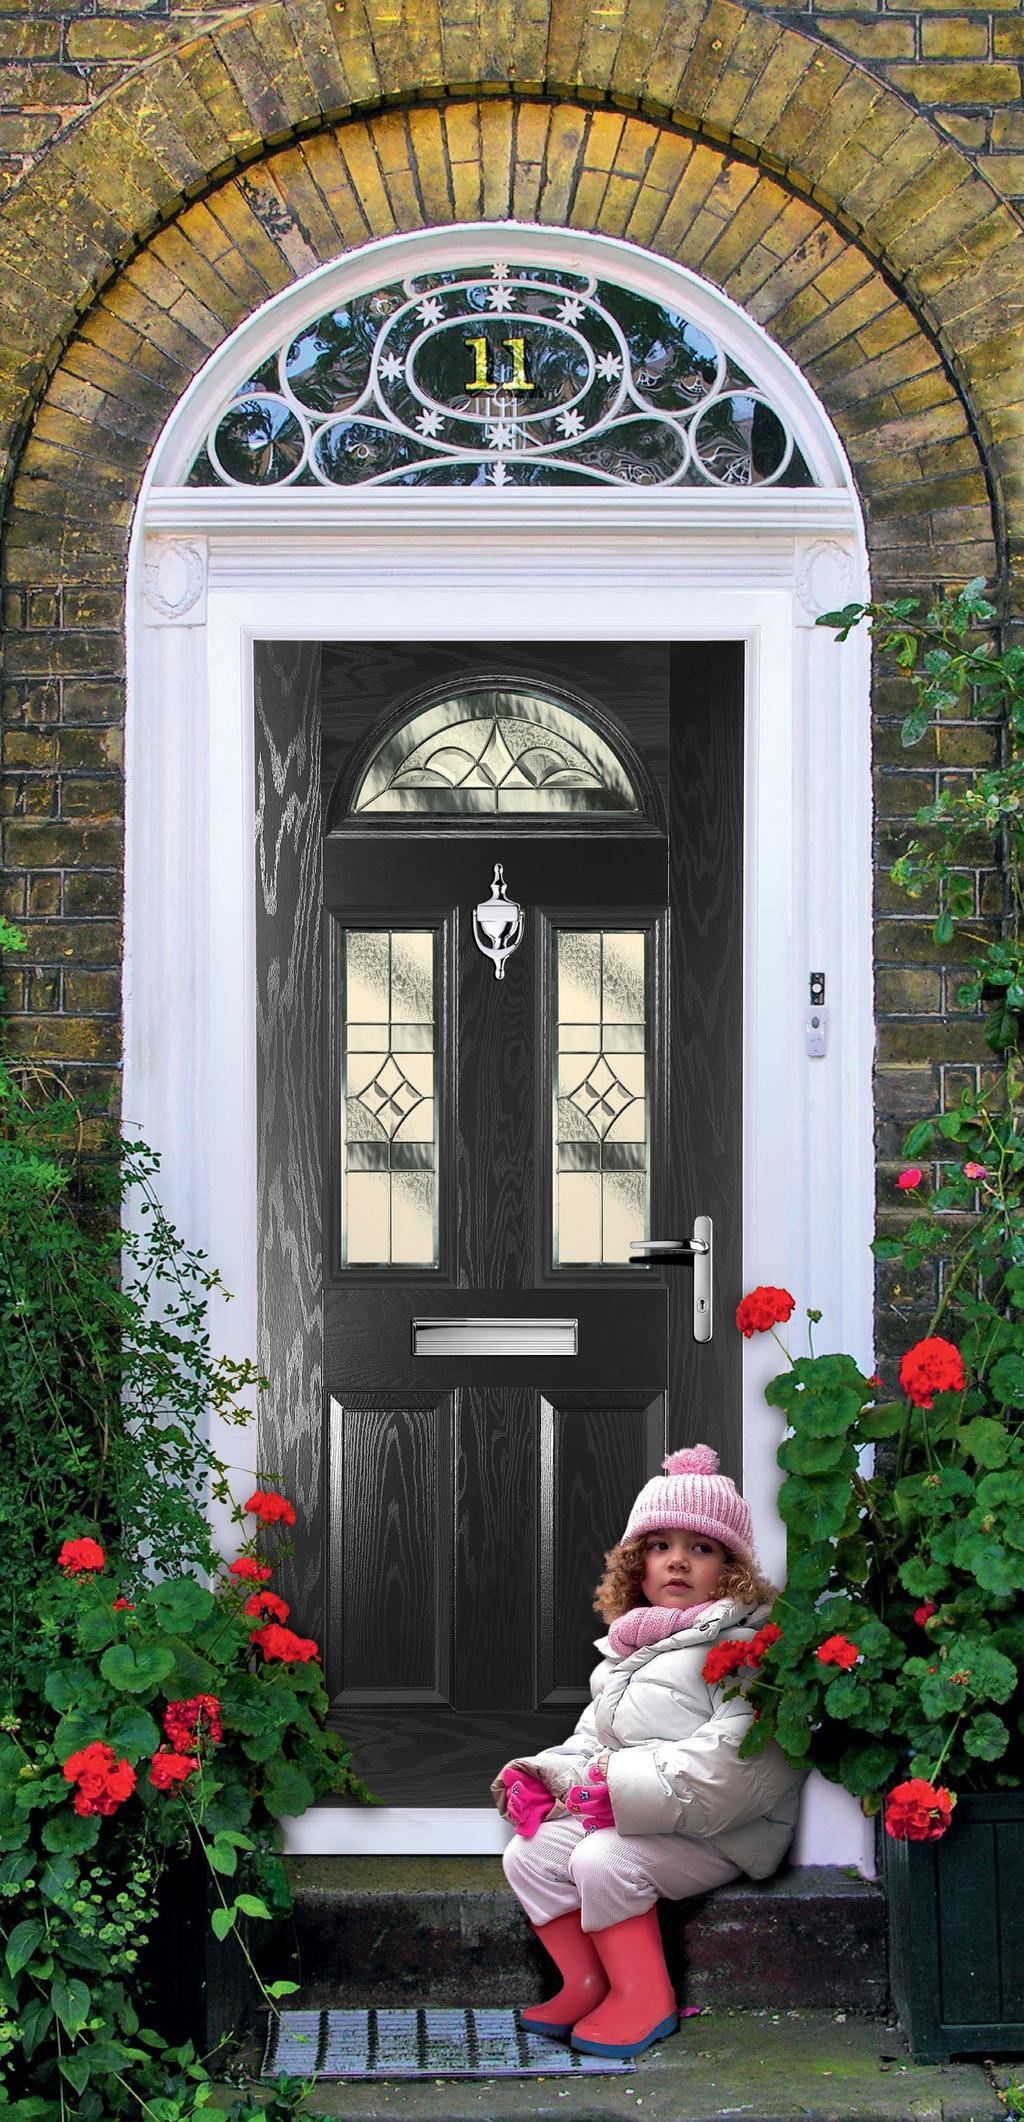 Our doors pass the PAS24 security standard, which measures resistance against forced mechanical and human entry.